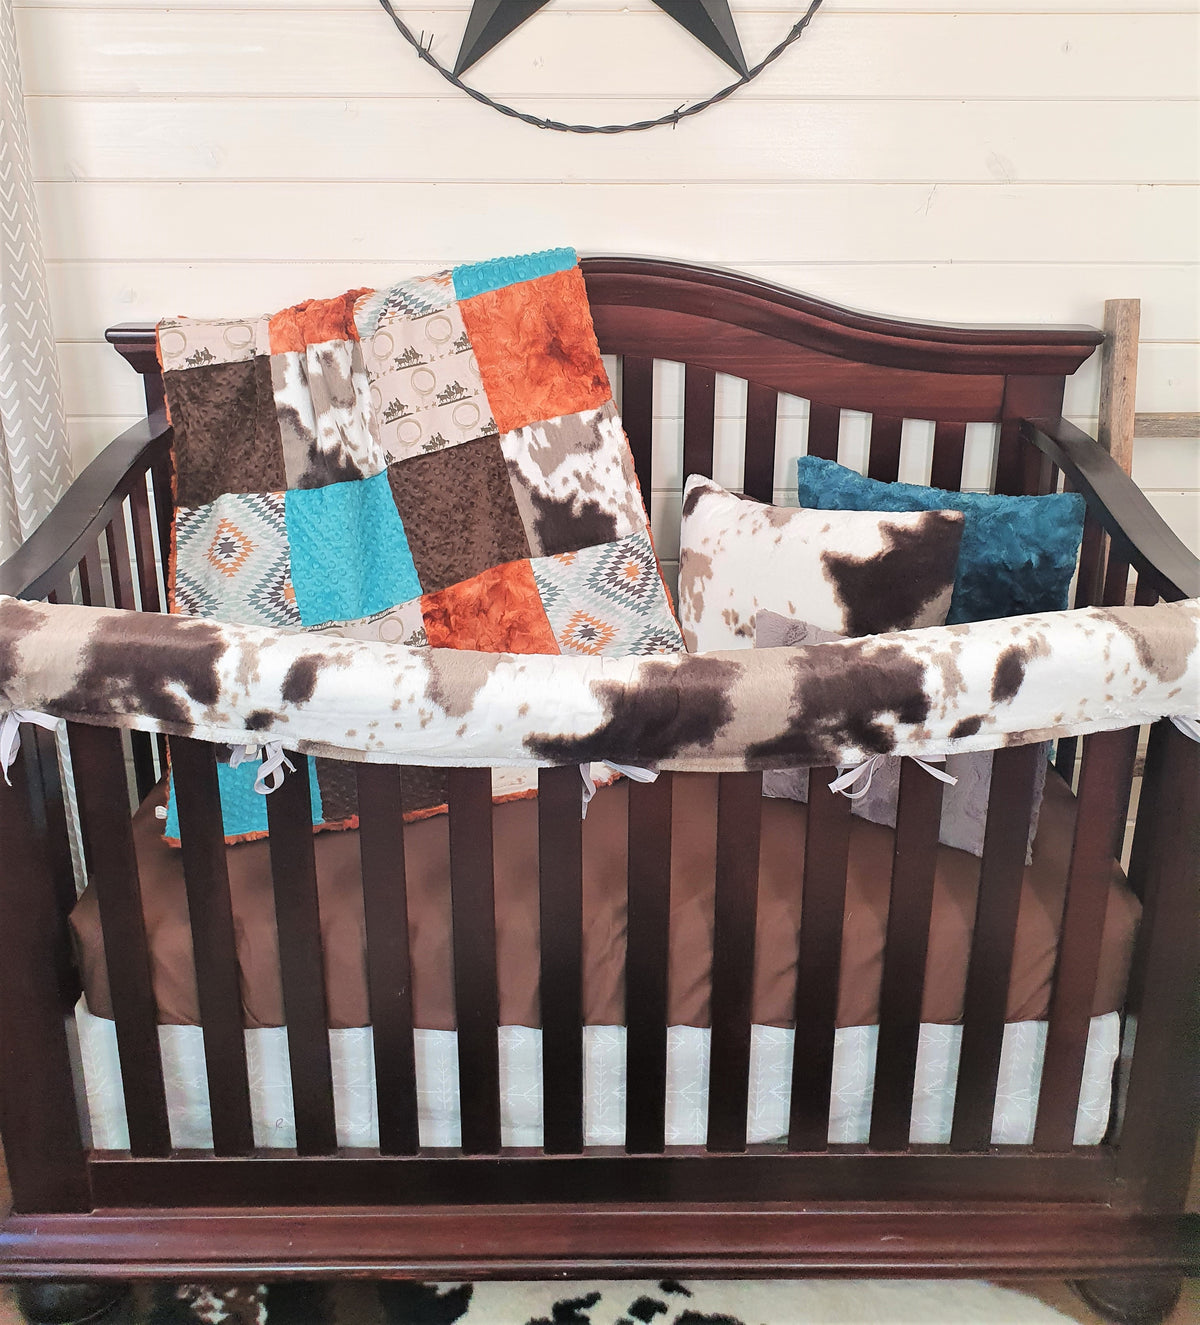 New Release Boy Crib Bedding - Team Roping Cowboy and Brown Sugar Cow Minky Western Baby Bedding Collection - DBC Baby Bedding Co